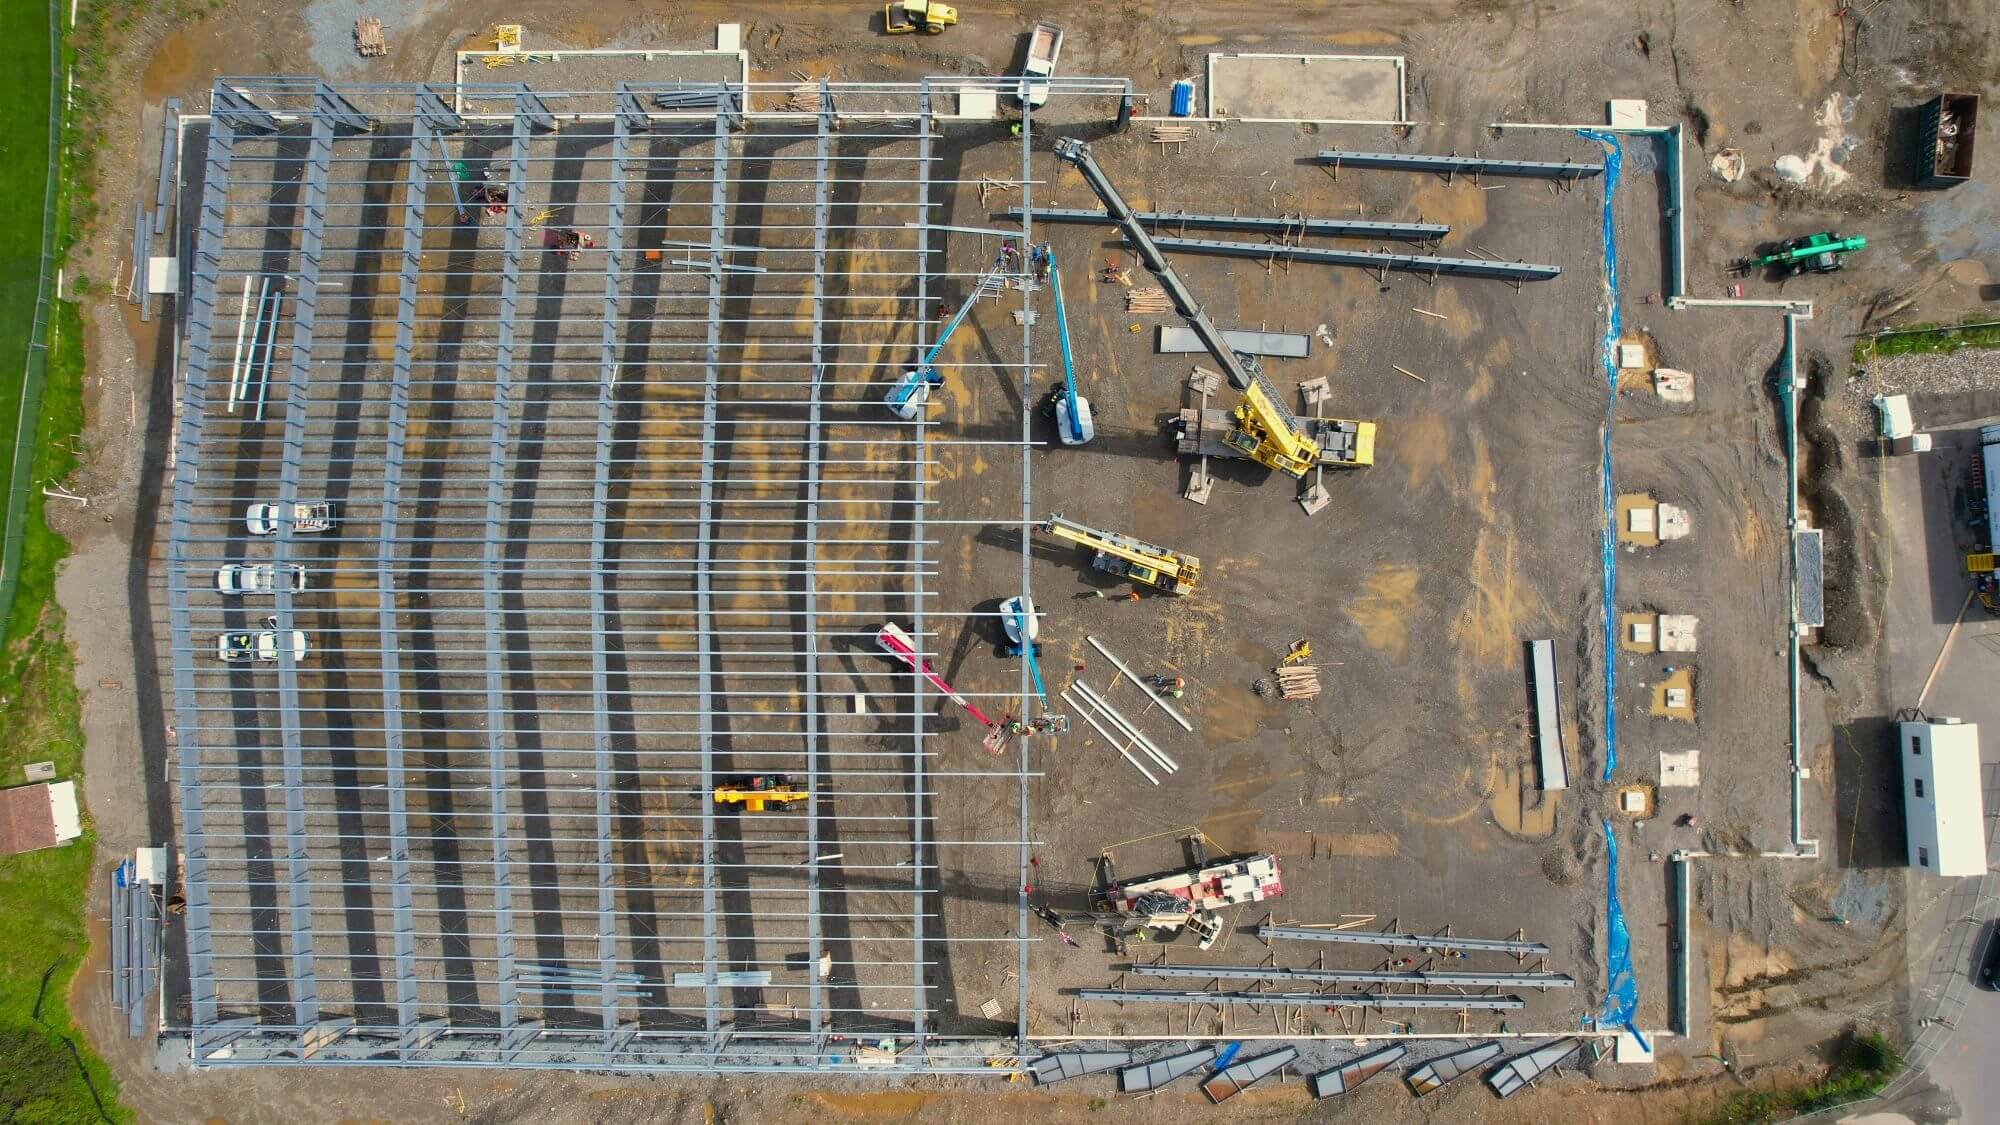 Pre-fabricated steel building, image shows structure in progress.